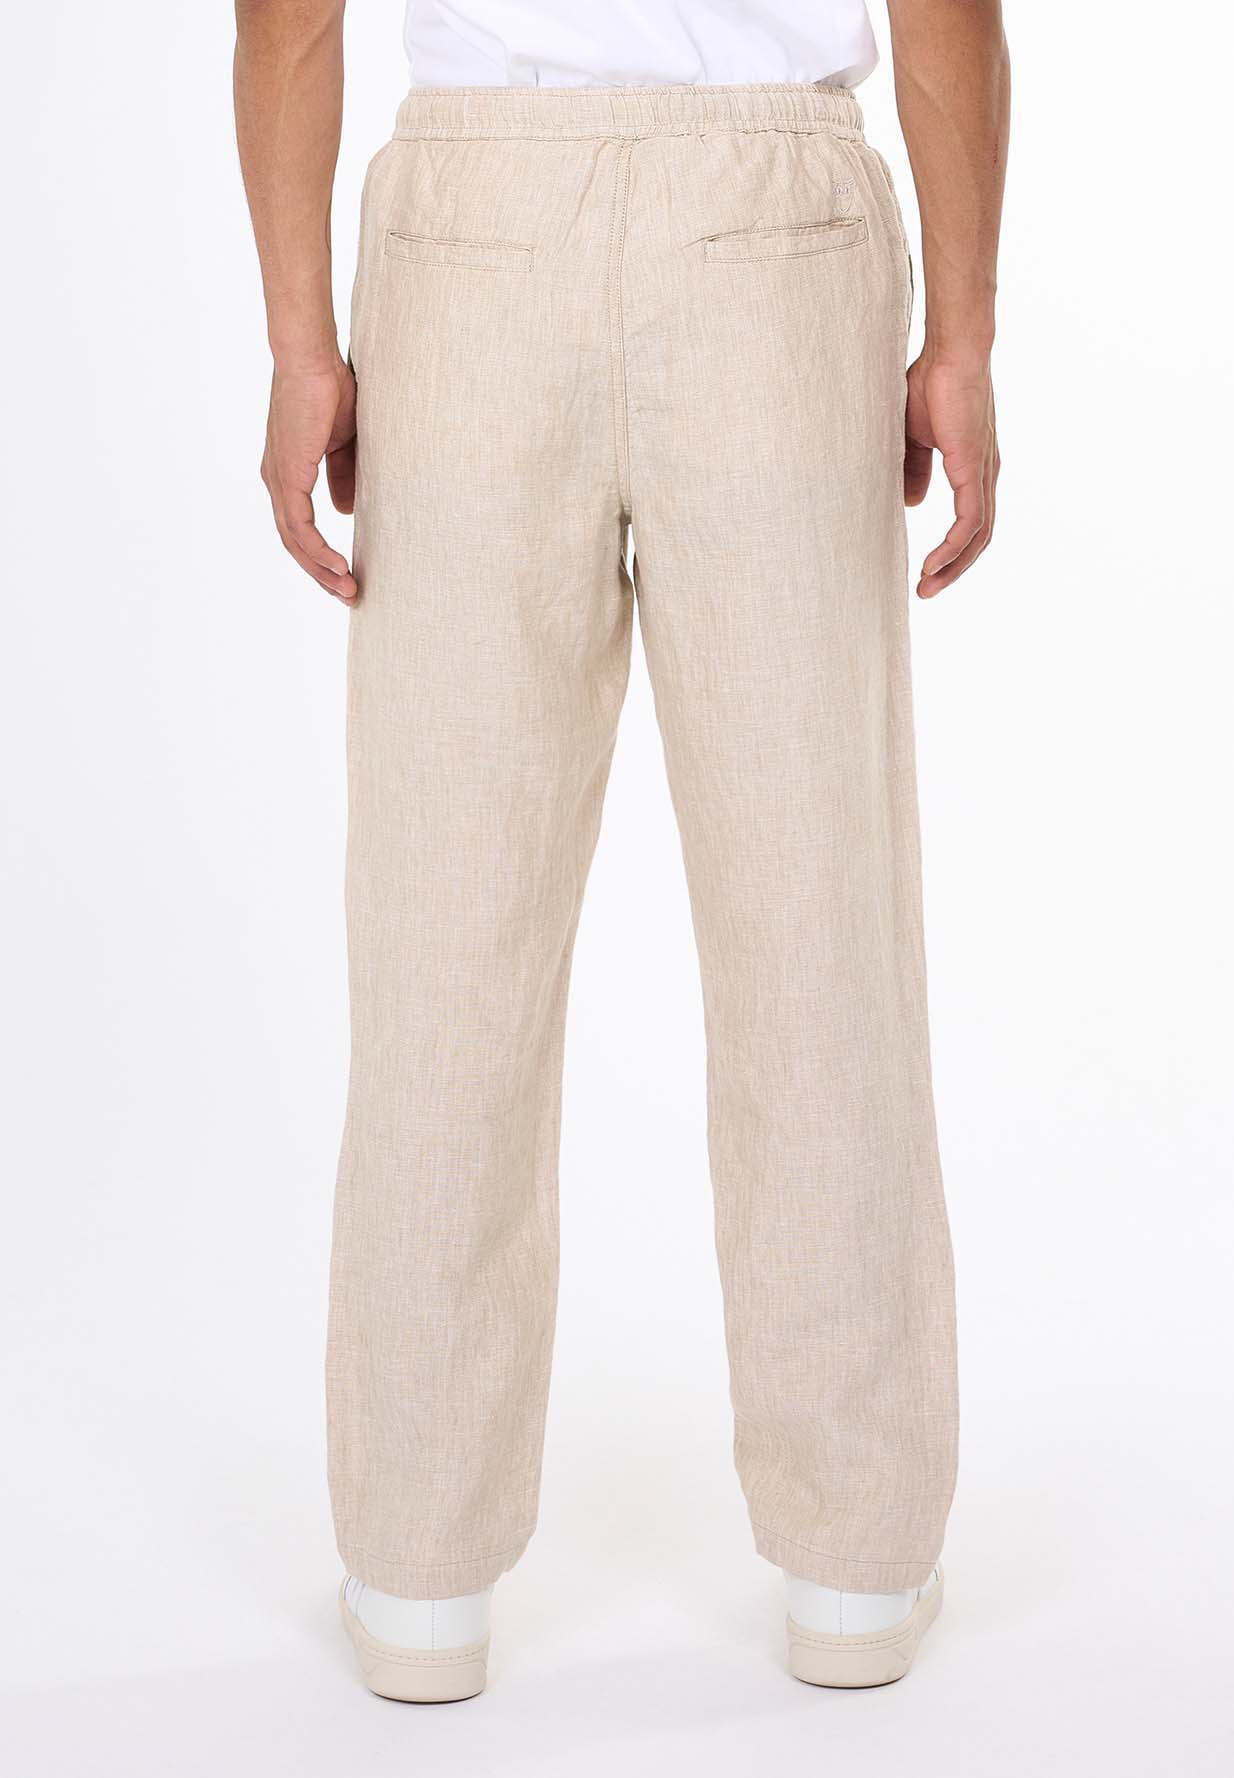 KNOWLEDGECOTTON APPAREL Loose Linen Pant light feather gray L